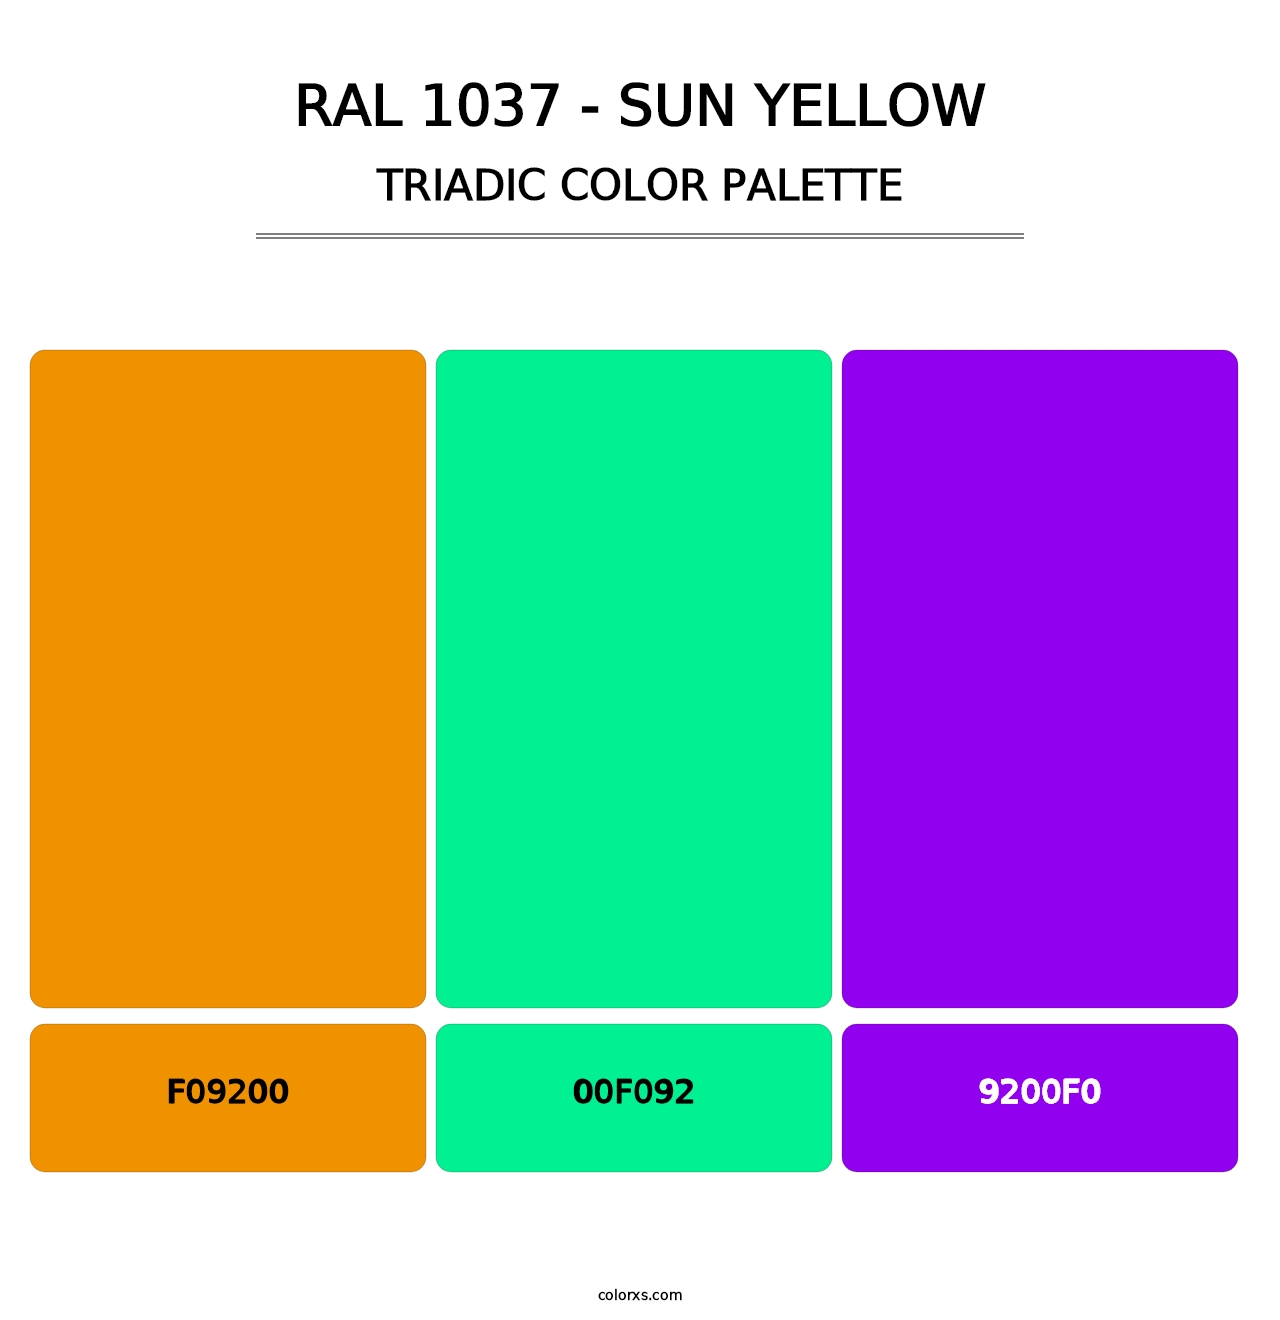 RAL 1037 - Sun Yellow - Triadic Color Palette